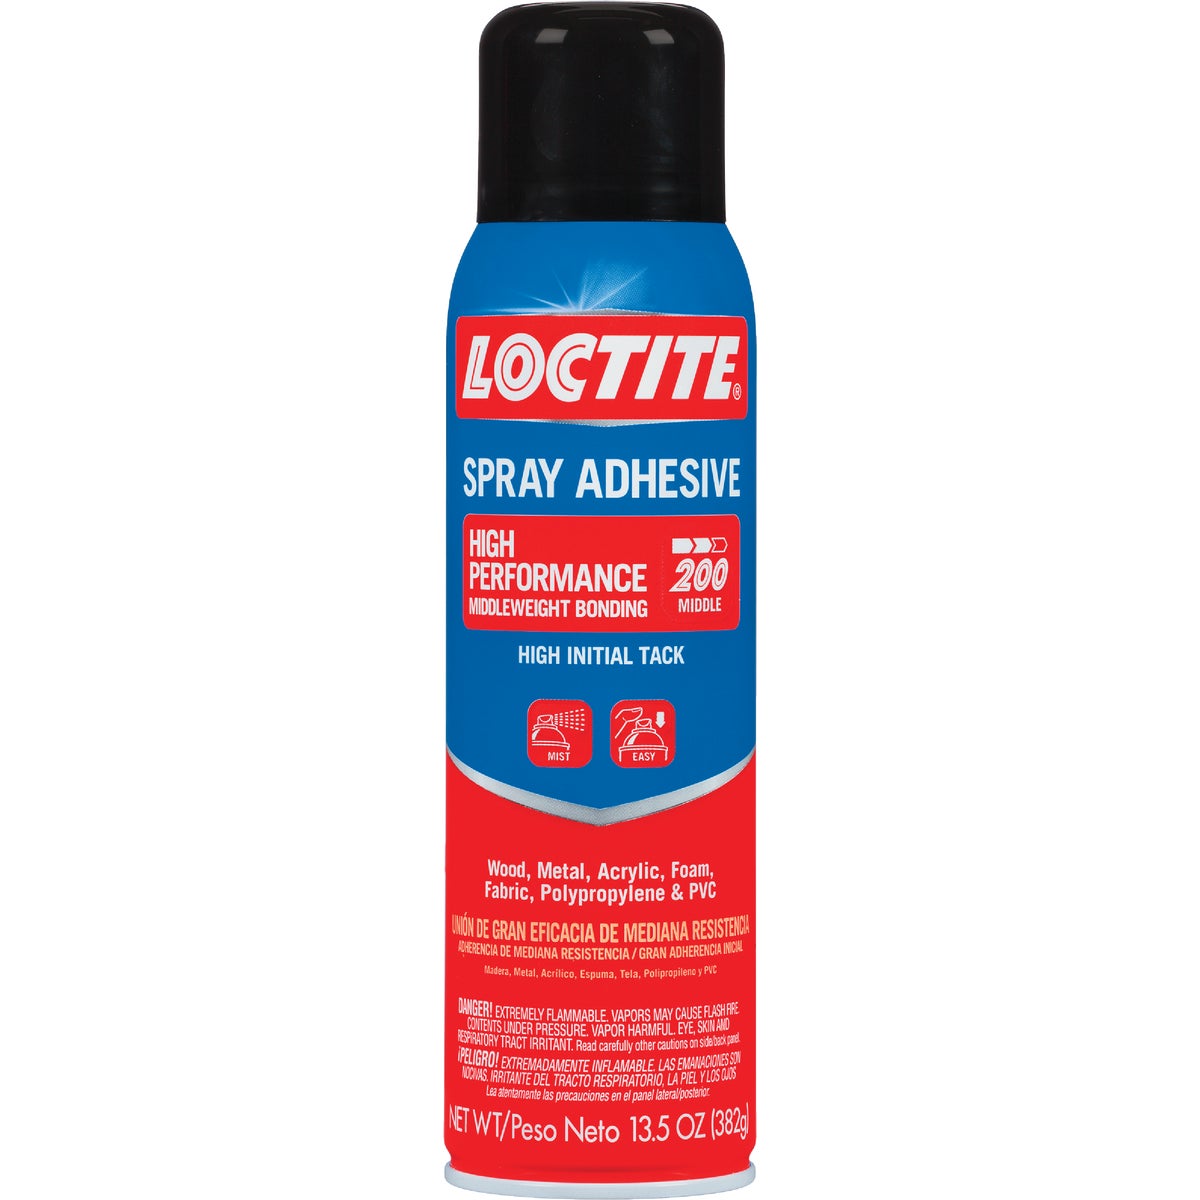 Item 363537, Loctite High Performance 200 is a premium-quality spray adhesive that dries